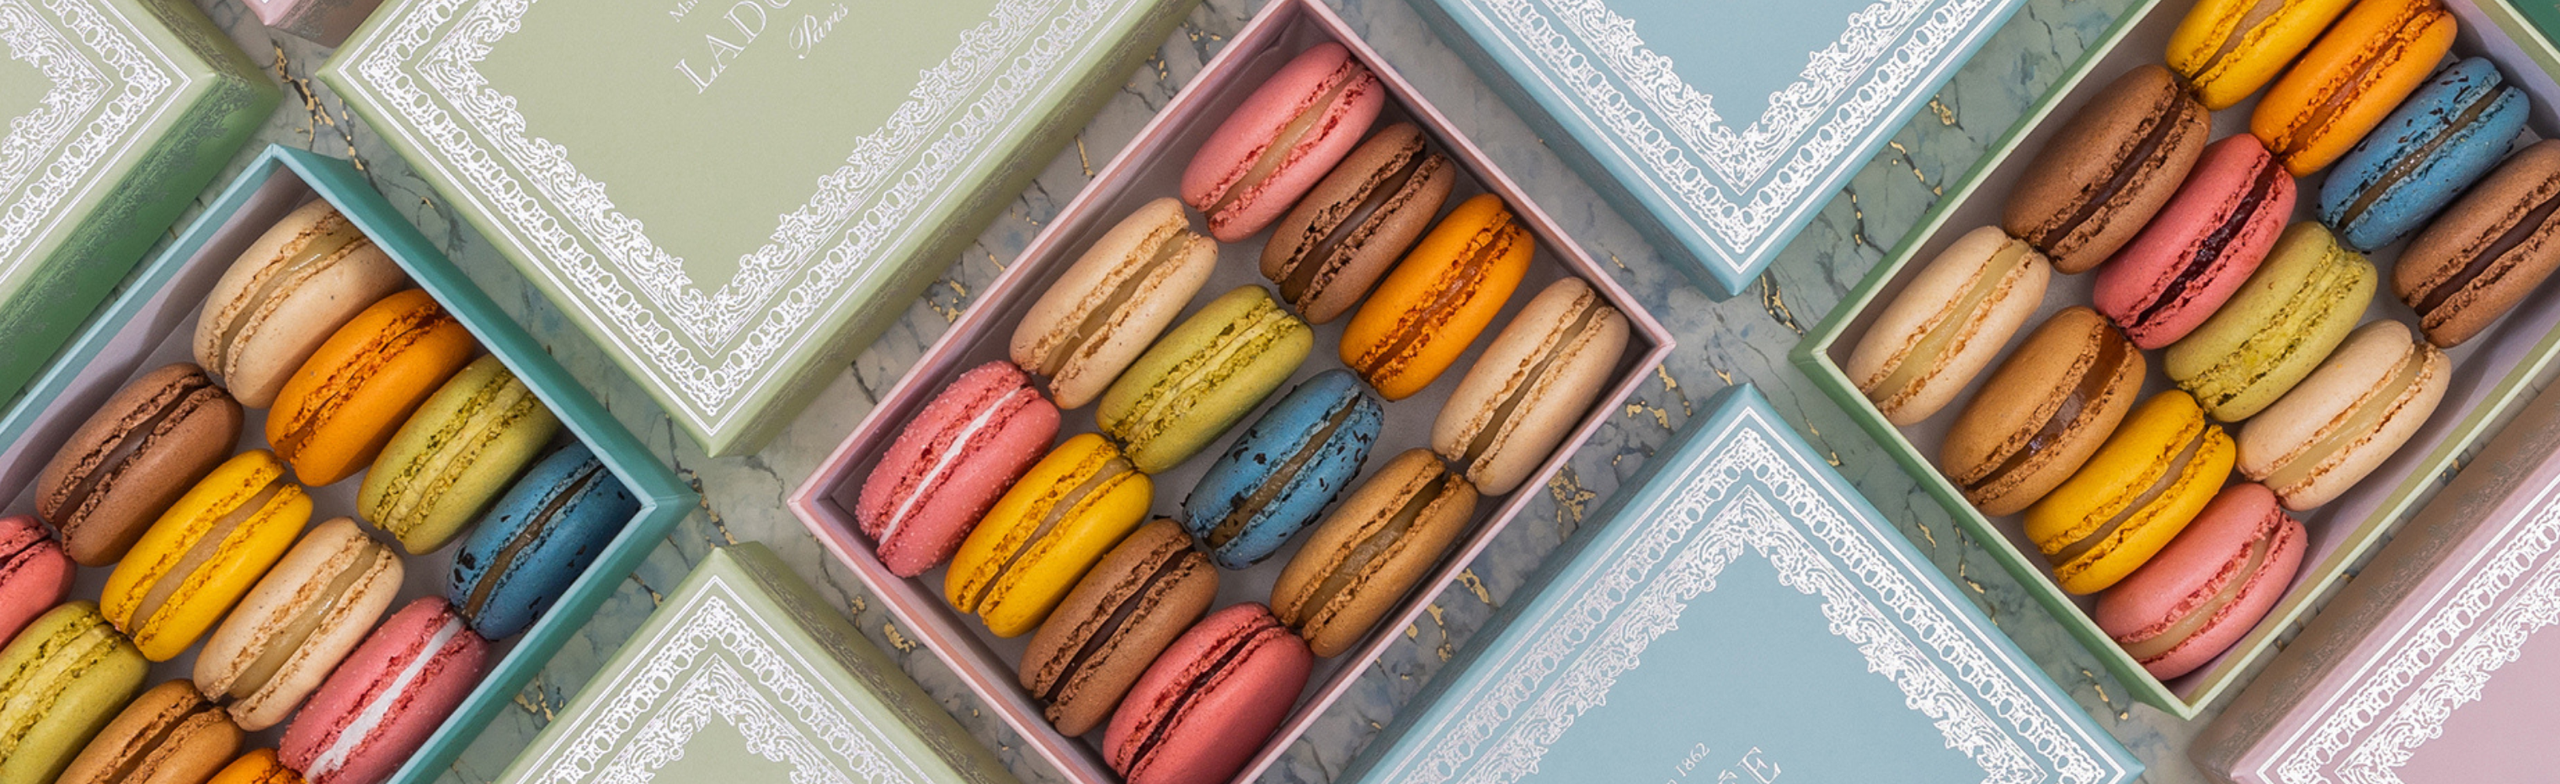 Our delicious assorted macarons gift boxes